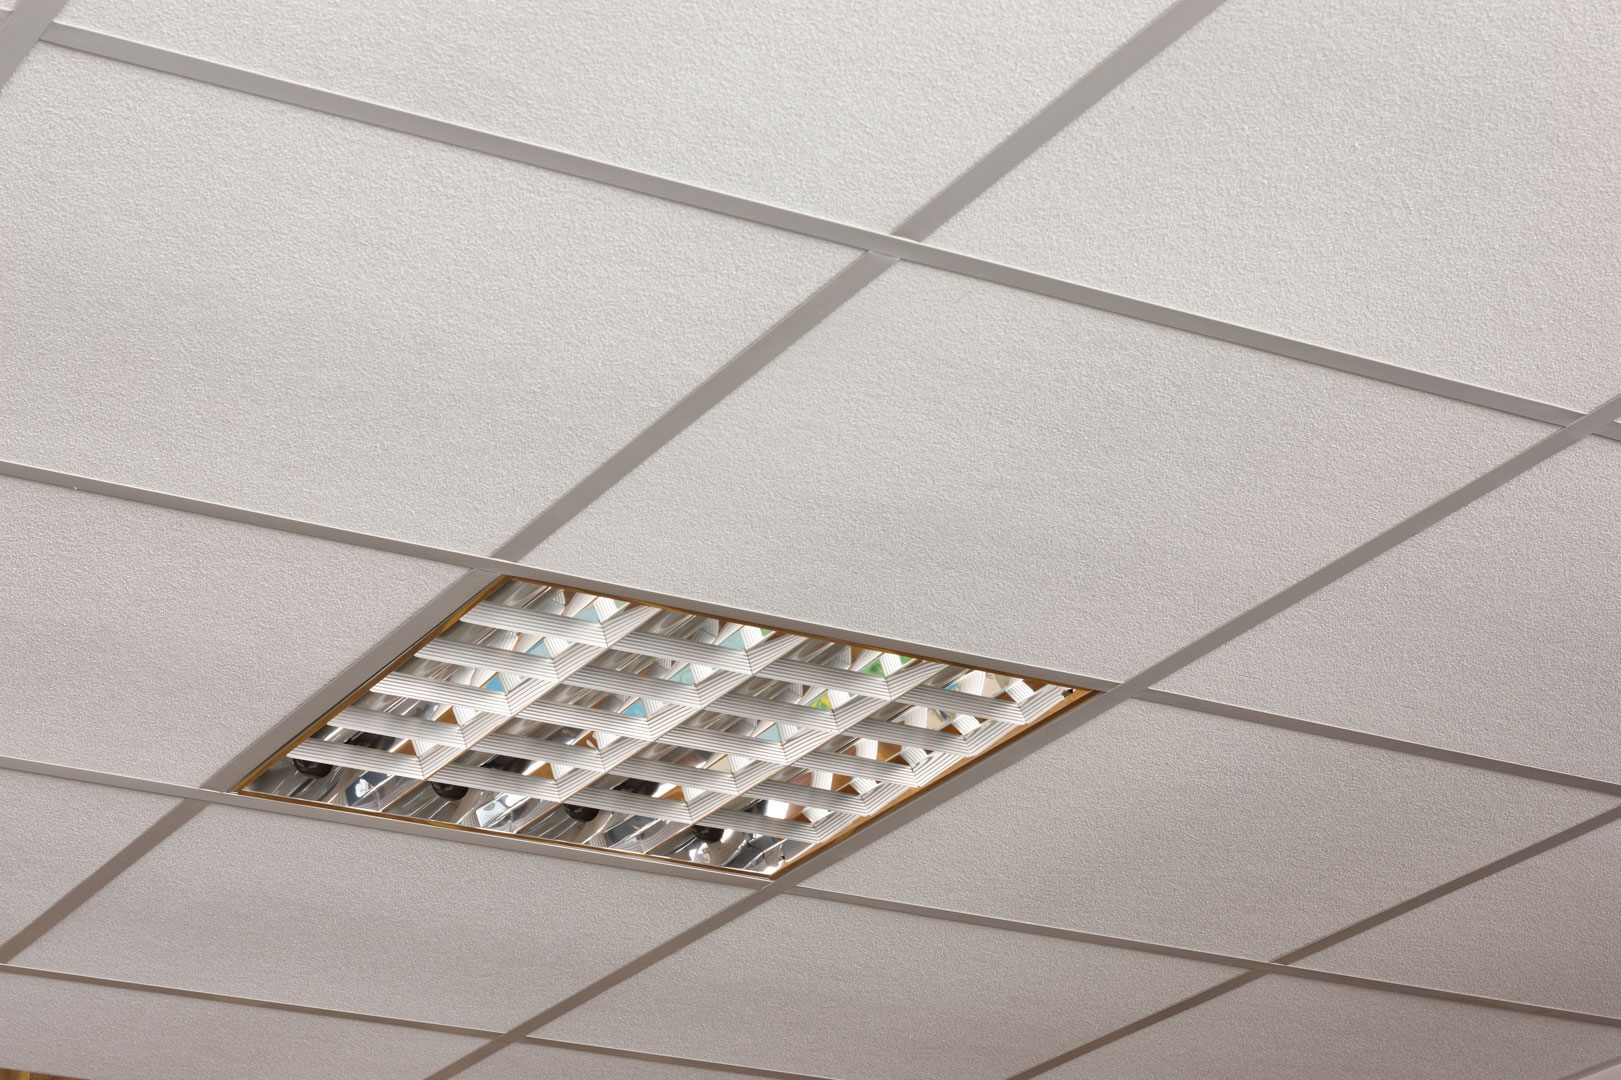 Imperial Ceiling Tile Sizesceiling tiles lights accessories a leading uk supplier of